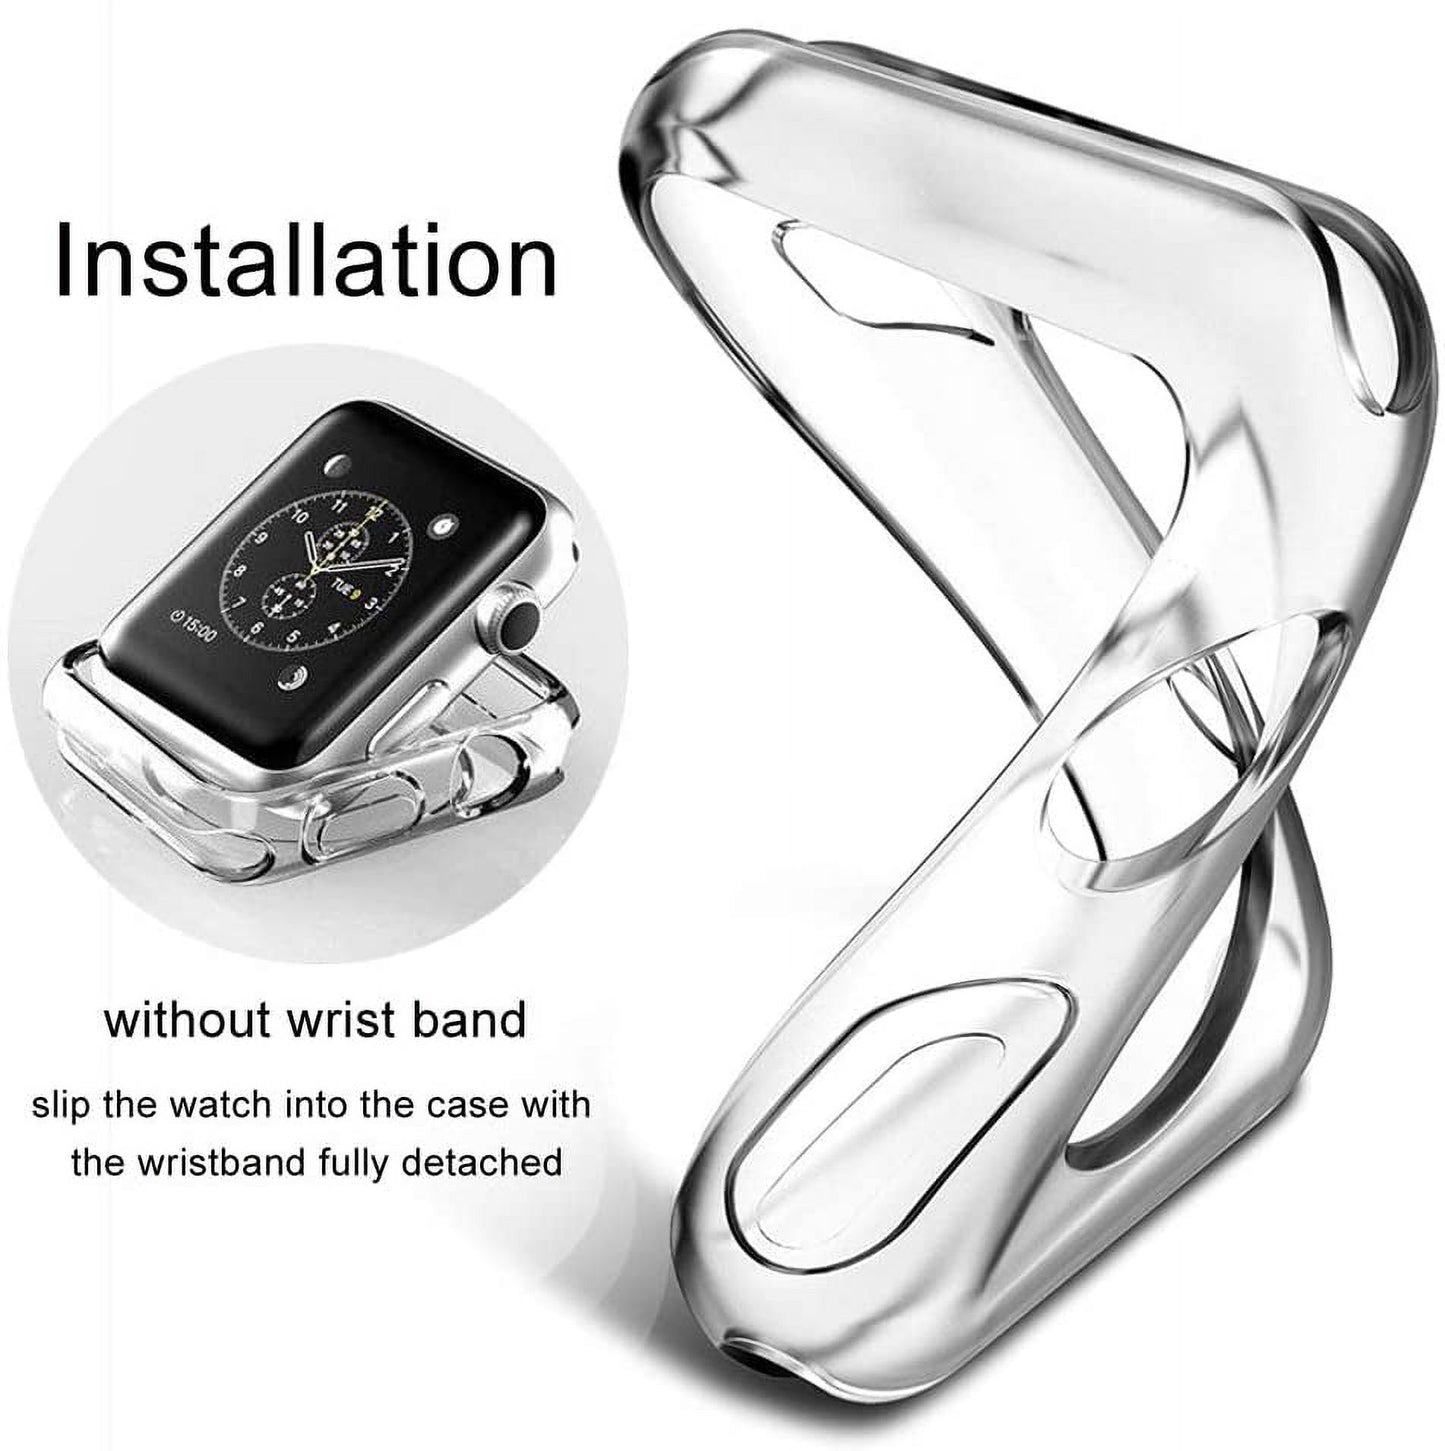 Apple Watch Case Clear Series Plated Soft TPU Anti-Scratch Shockproof Protective Screen Iwatch Shell Transparent Cover Protector Bumper - Clear